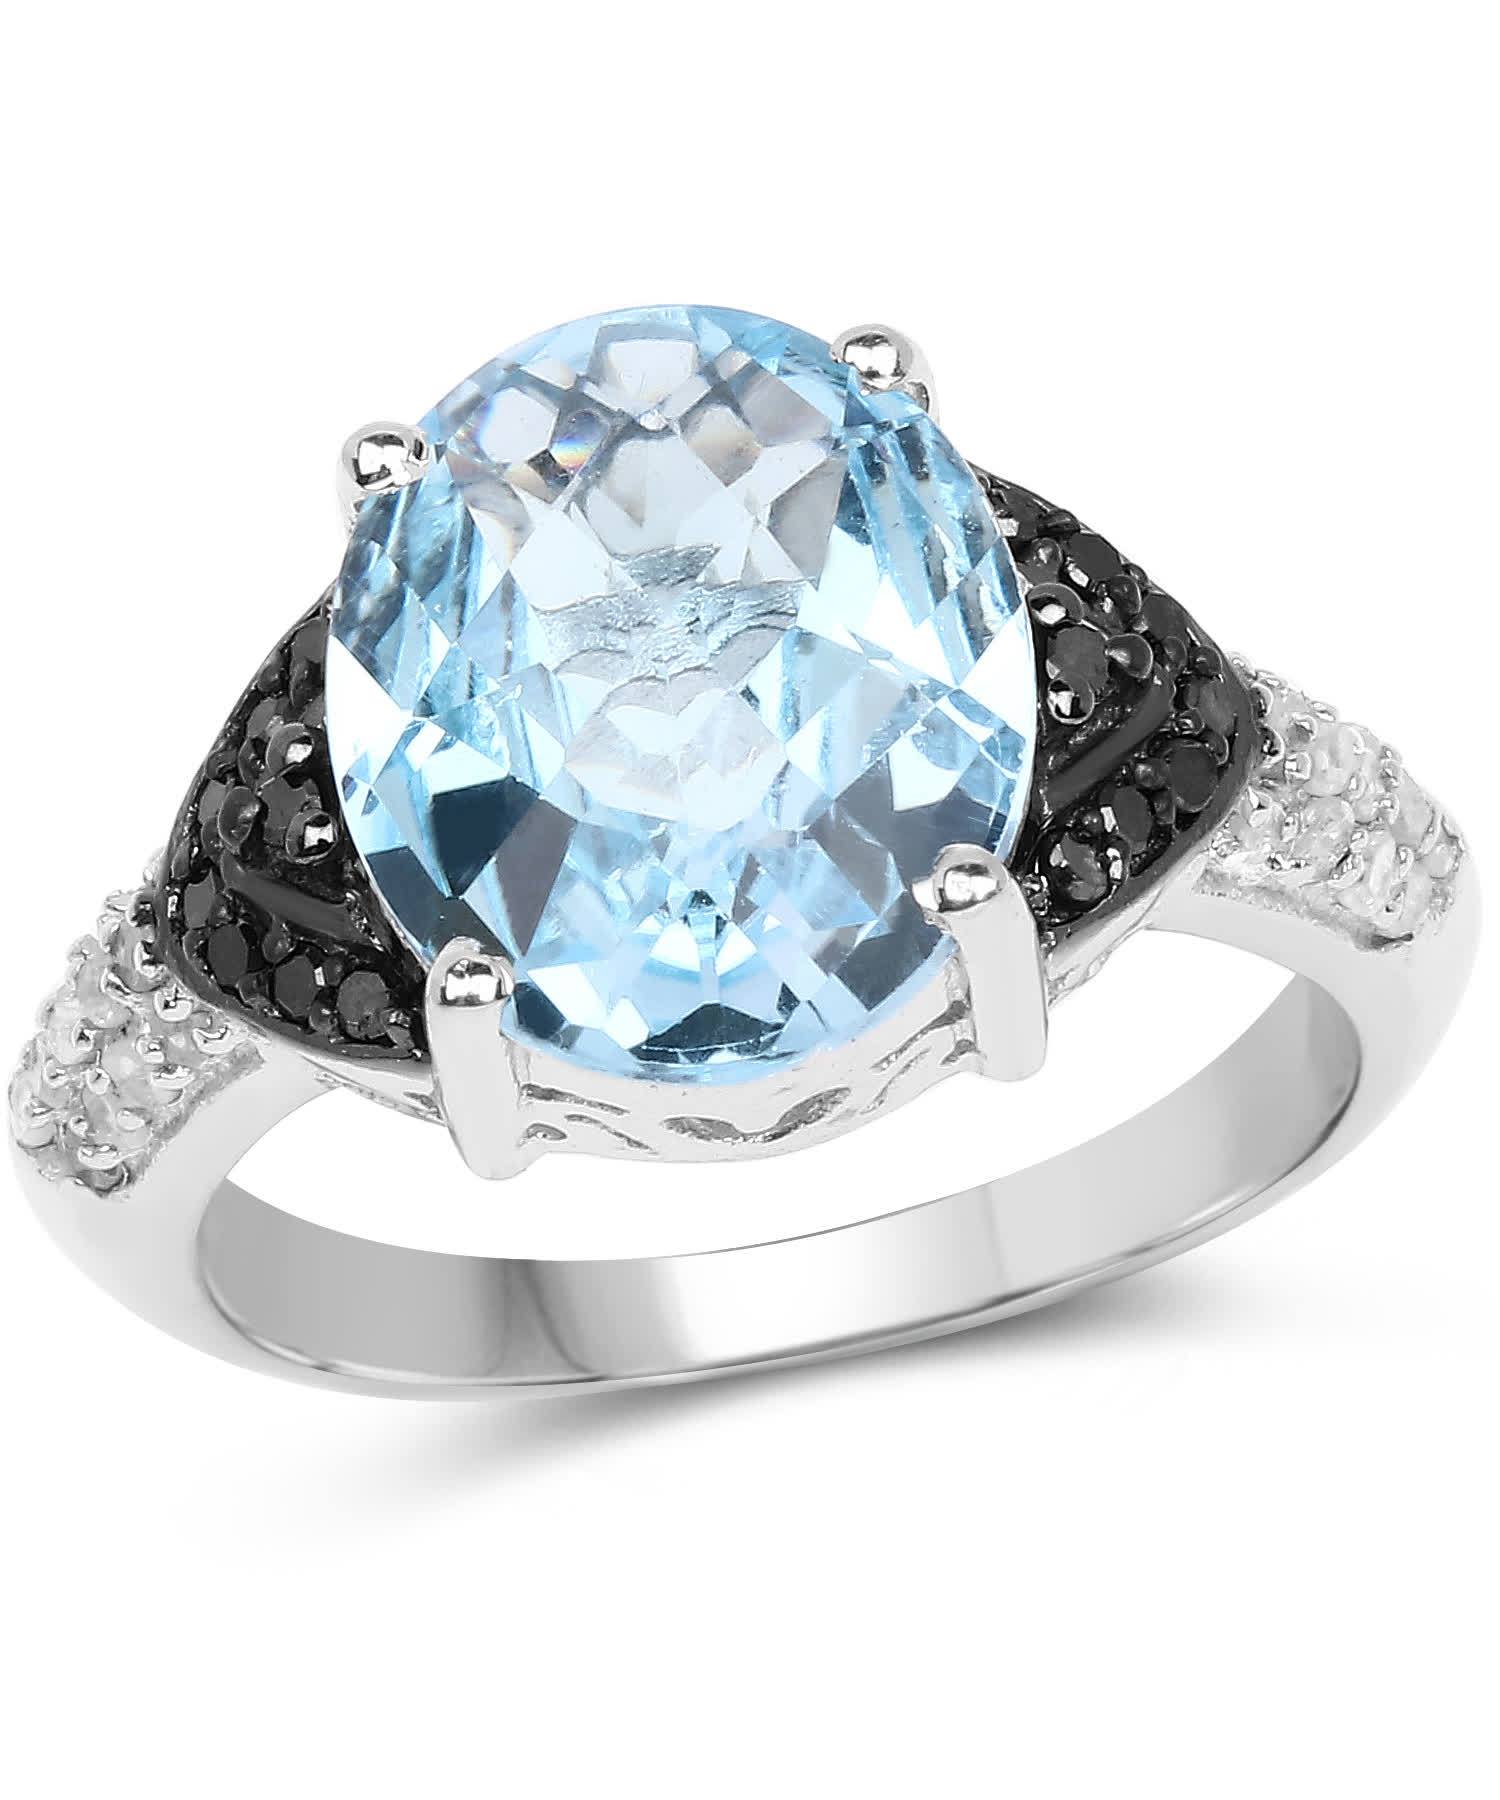 5.37ctw Natural Swiss Blue Topaz and Black Diamond Rhodium Plated 925 Sterling Silver Cocktail Ring View 1